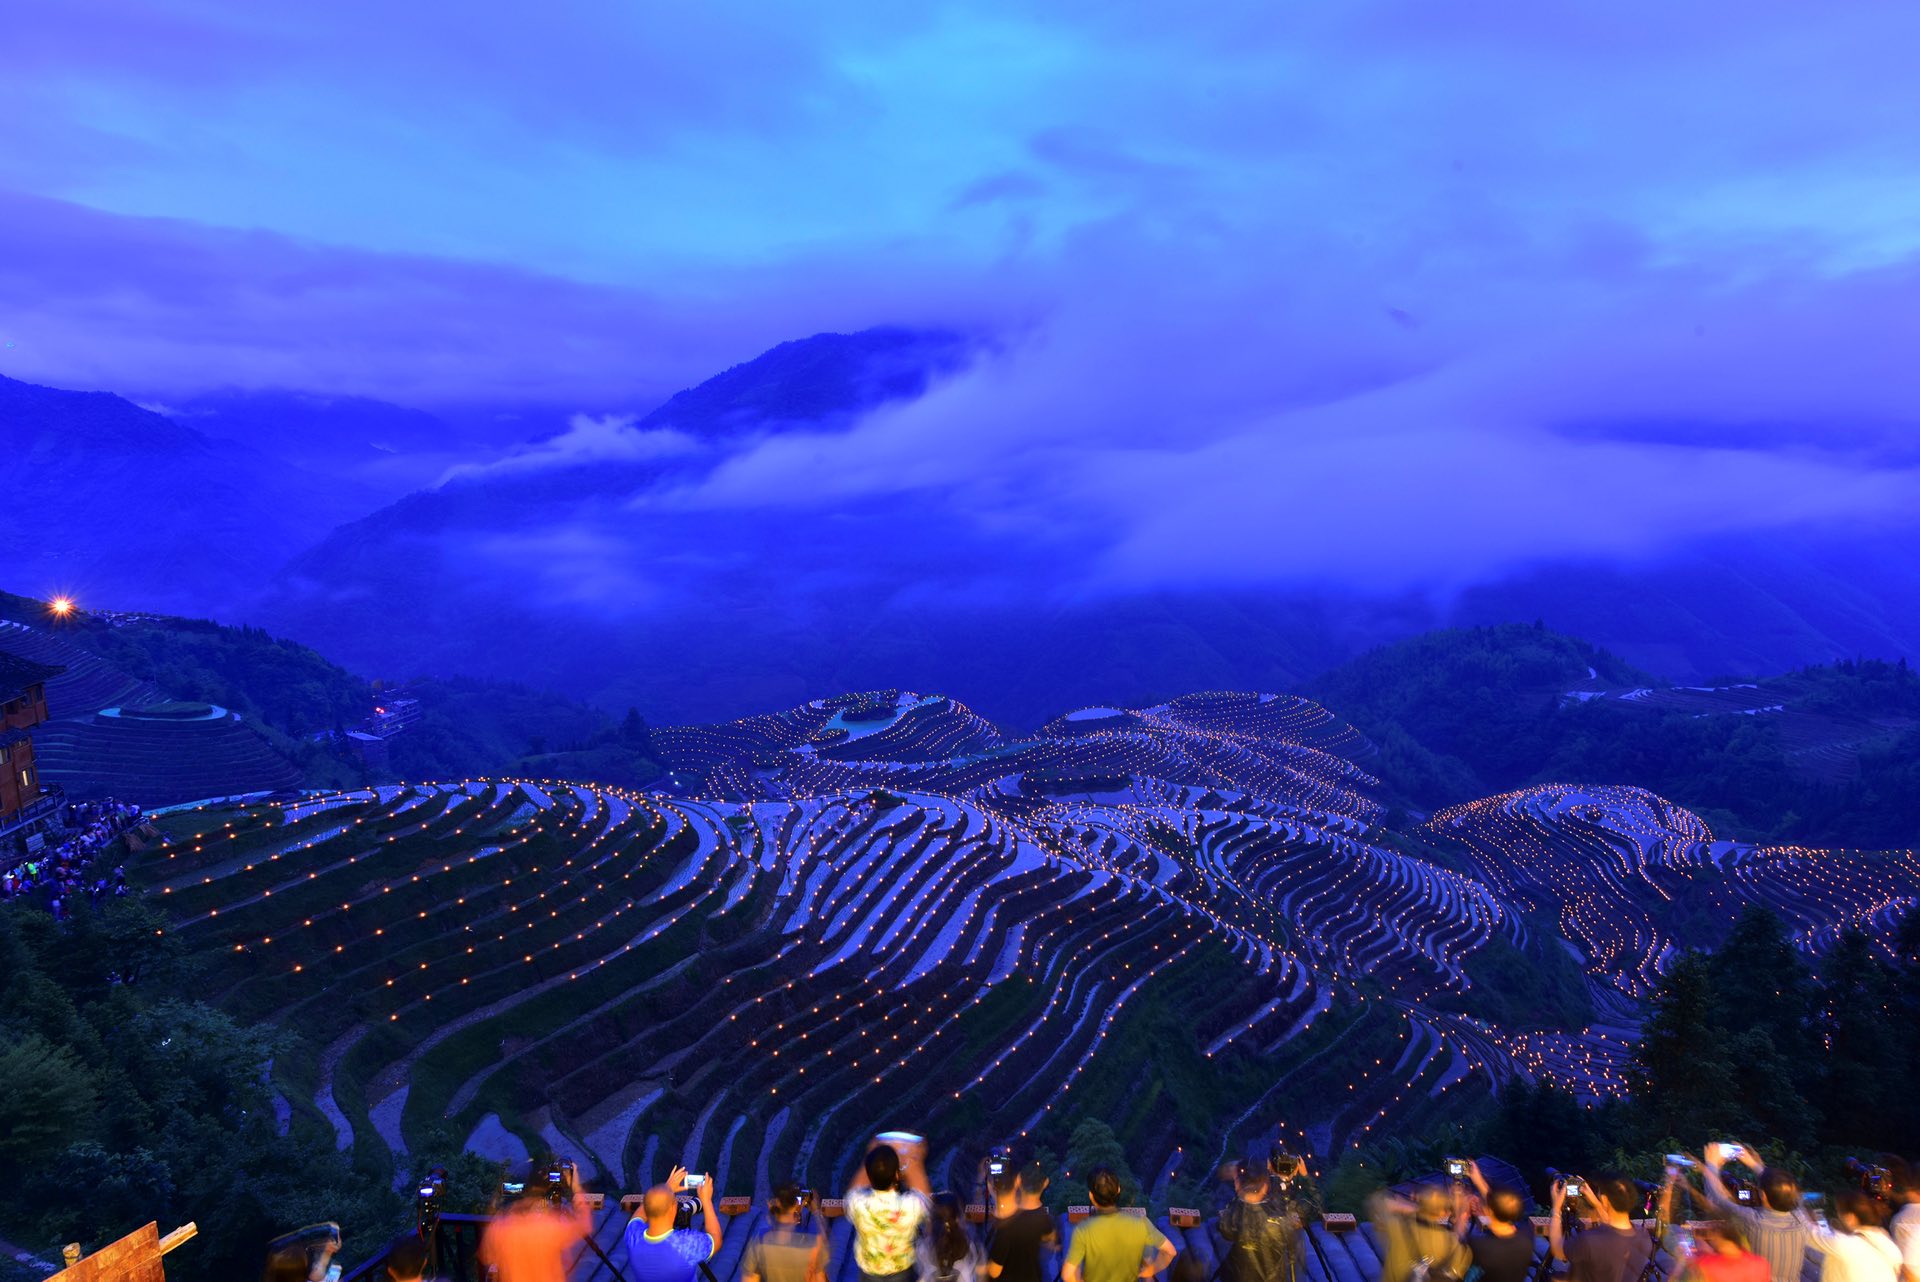 People take pictures of thousands of torches placed in terraced fields during a local festival praying for a good harvest, Guilin, China. PHOTO: REUTERS